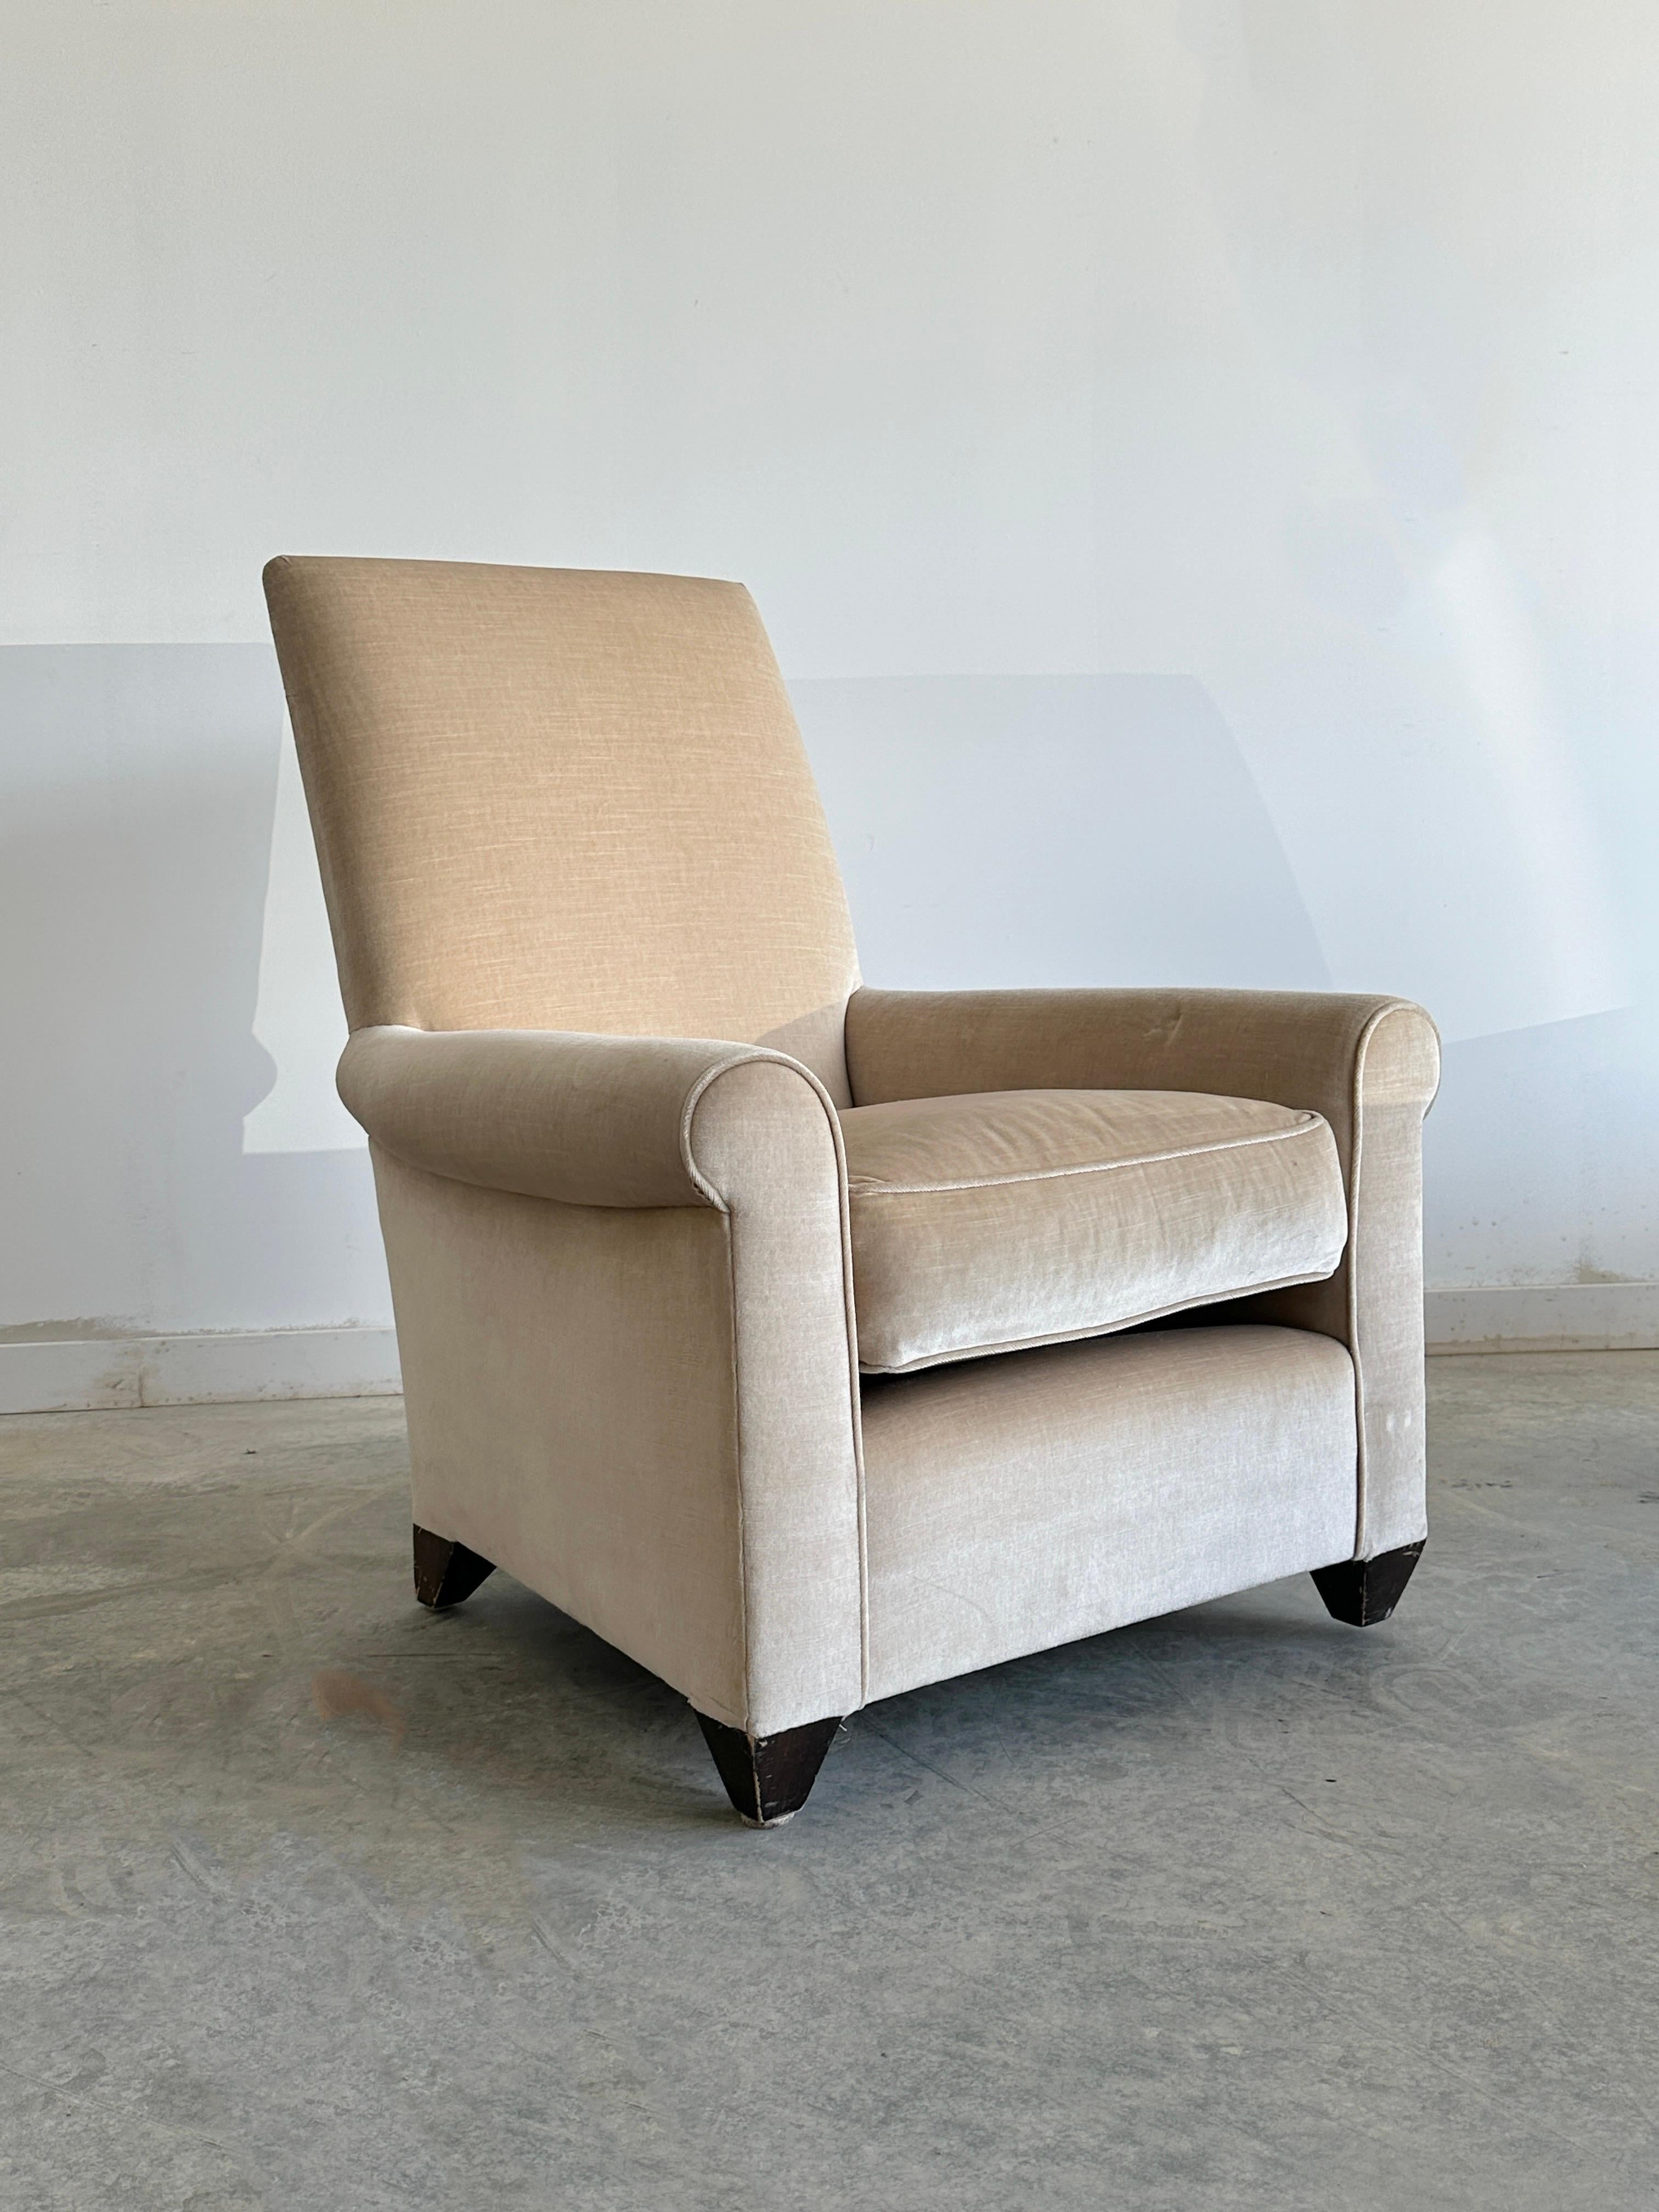 St. James chair by Angelo Donghia for Donghia Inc In Fair Condition For Sale In Kleinburg, ON